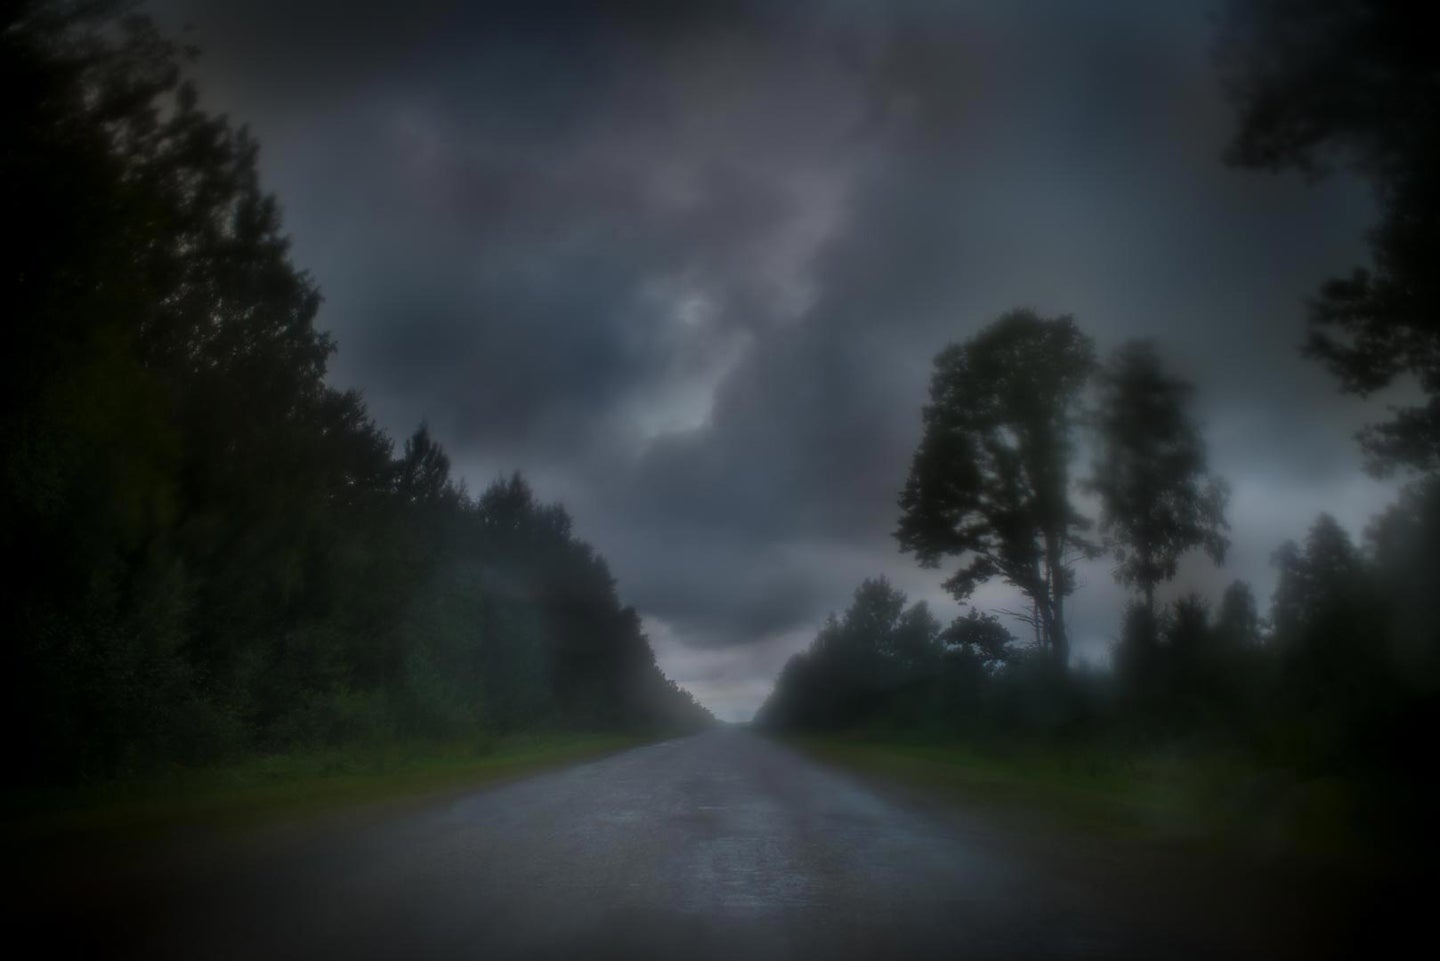 Todd Hido: Bright Black World, Deluxe Limited Edition Suite (with 15 Archival Pigment Prints) [SIGNED]